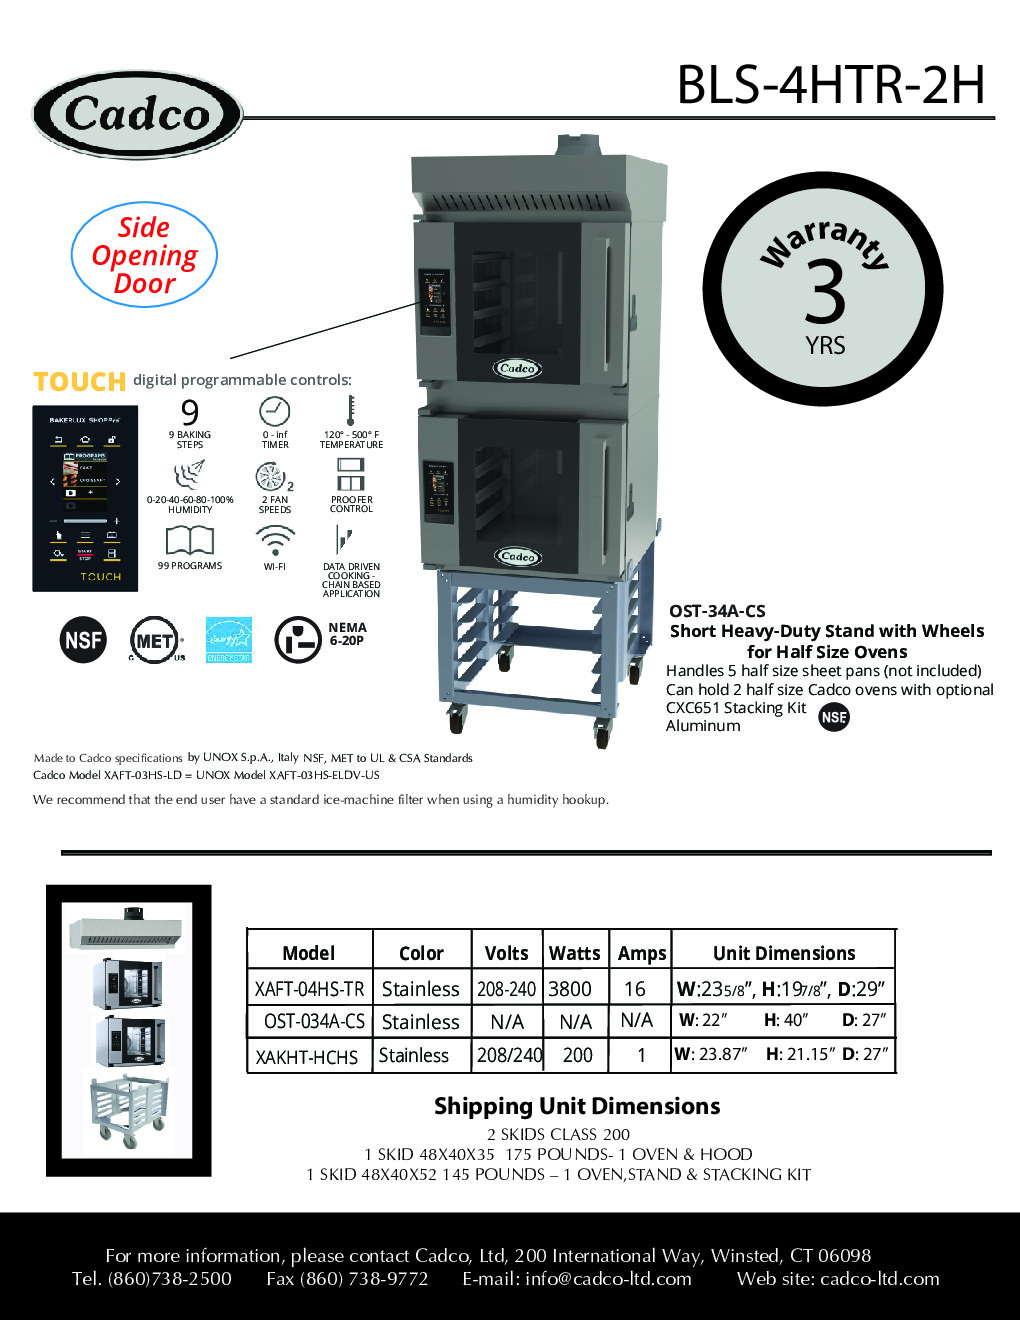 Cadco BLS-4HTR-2H Double-Deck Electric Convection Oven w/ Digital Touch Controls, Half-Size